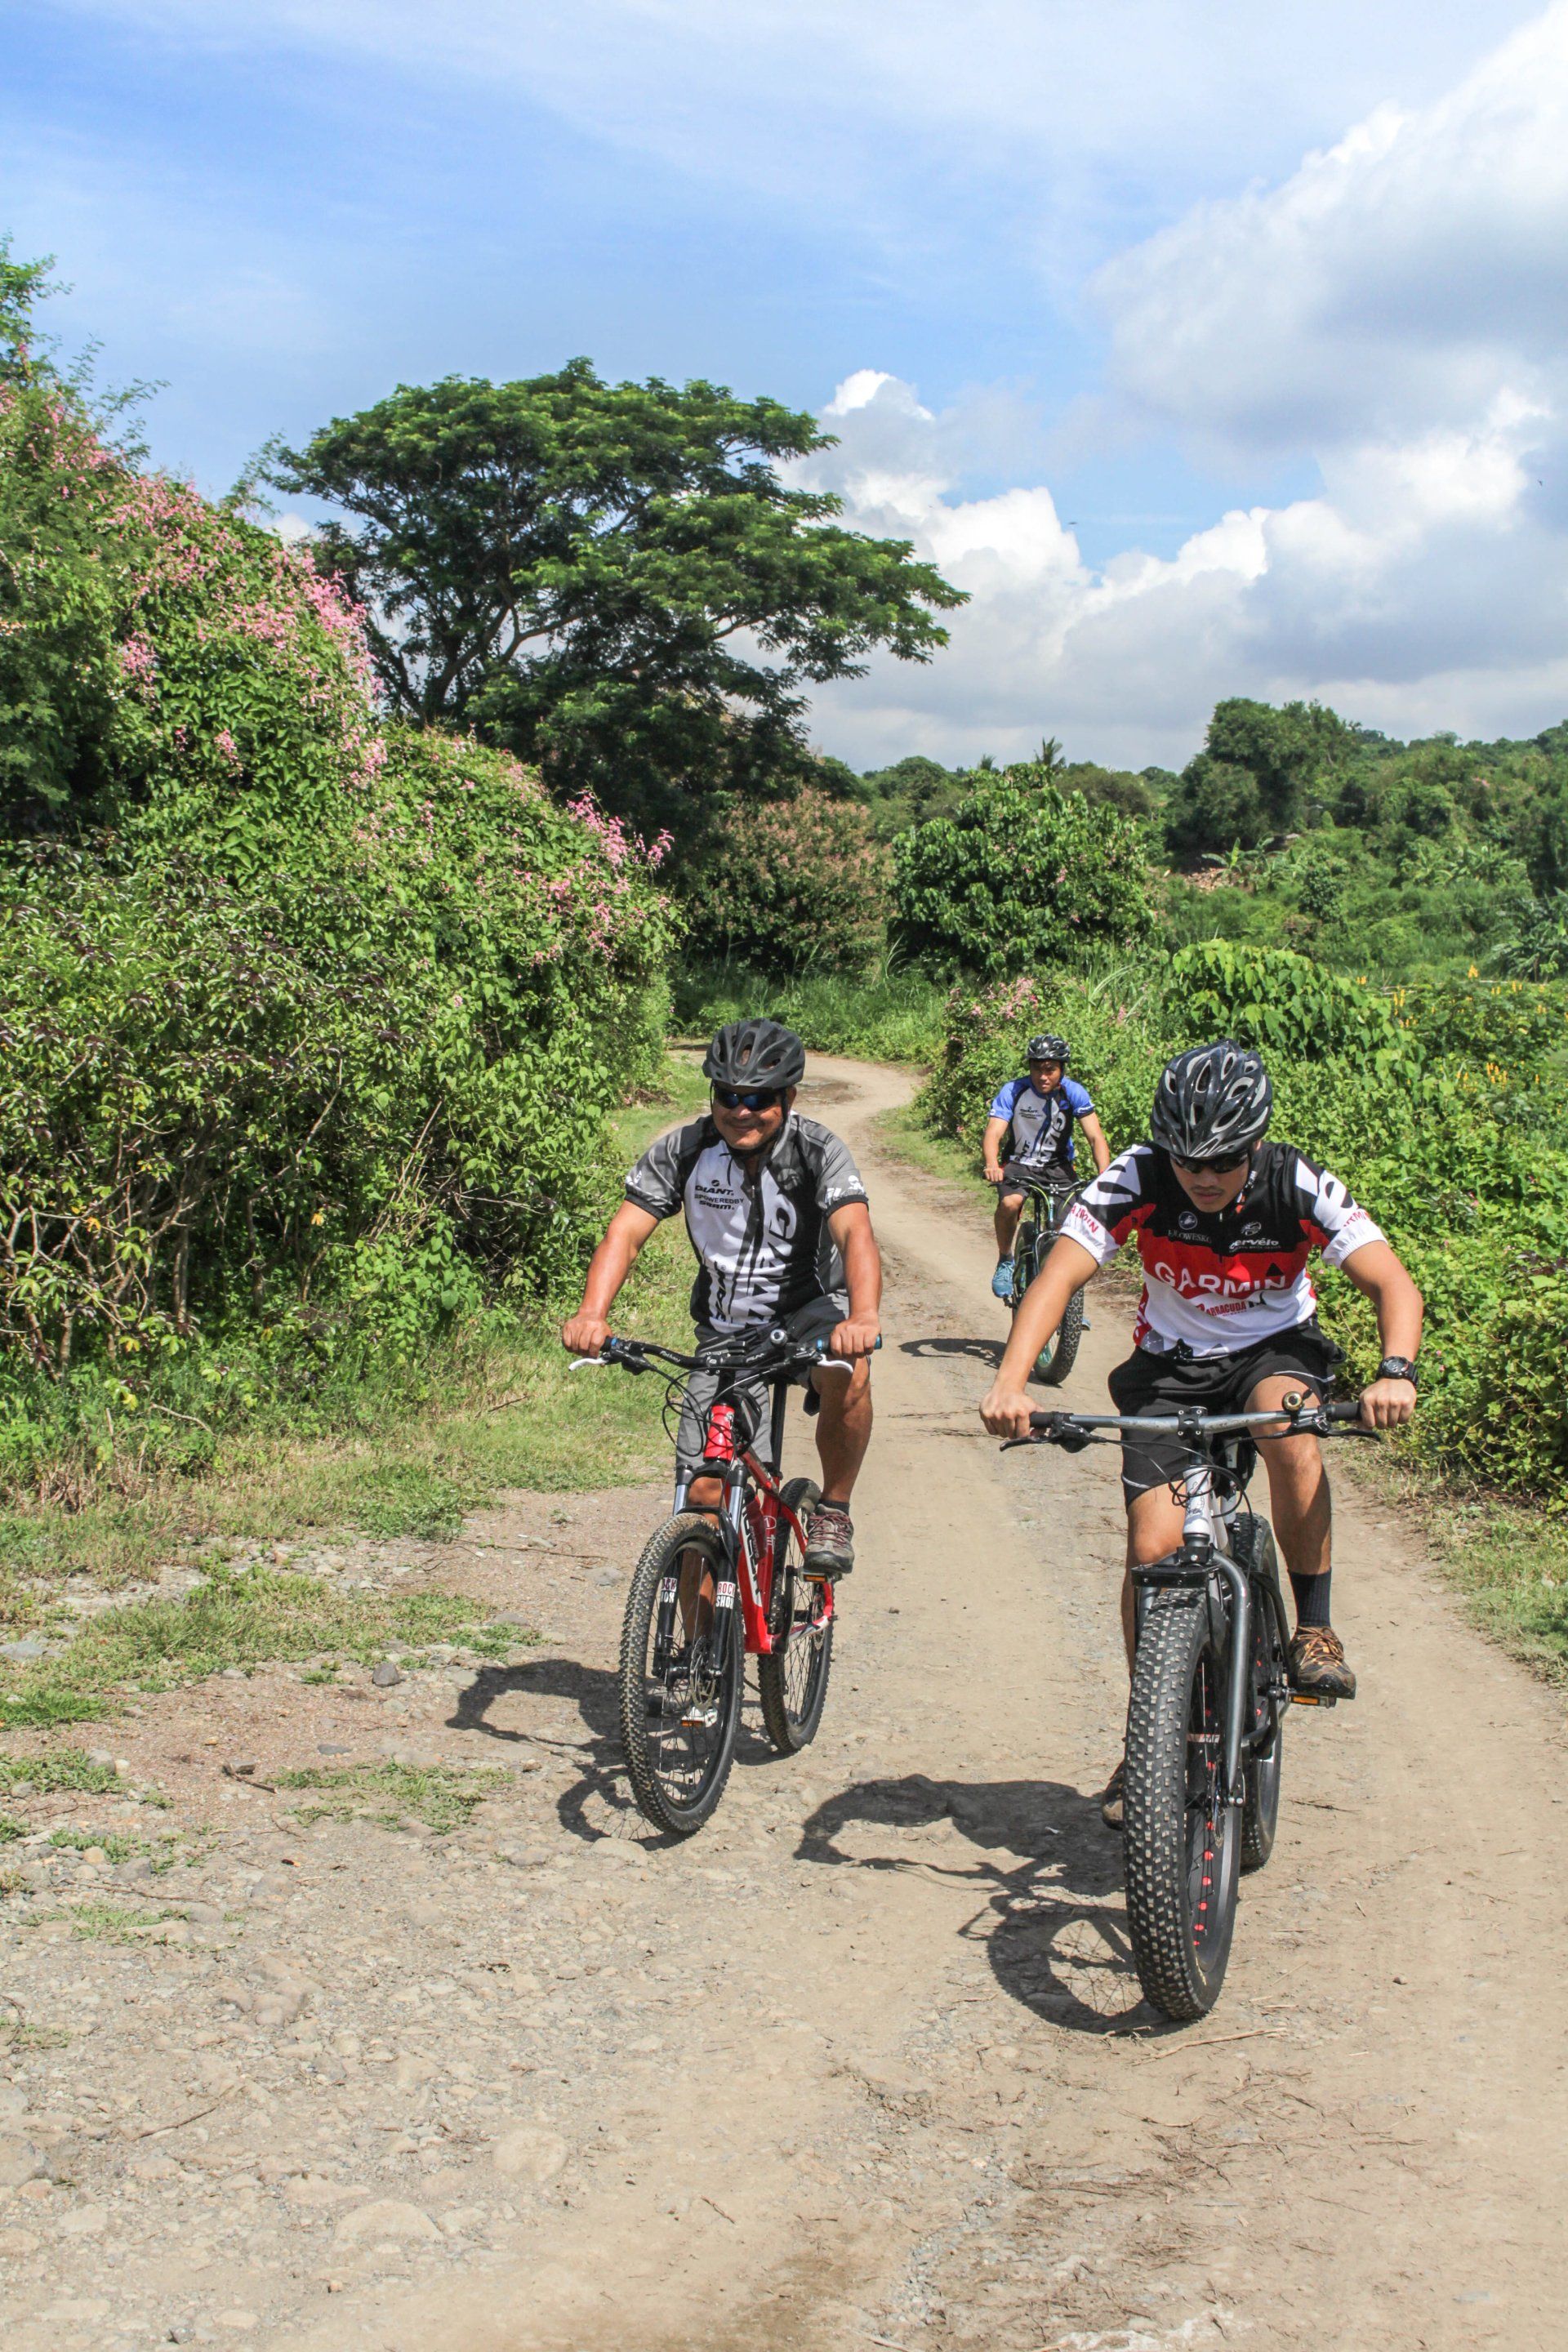 A group of people are riding bicycles down a dirt road.